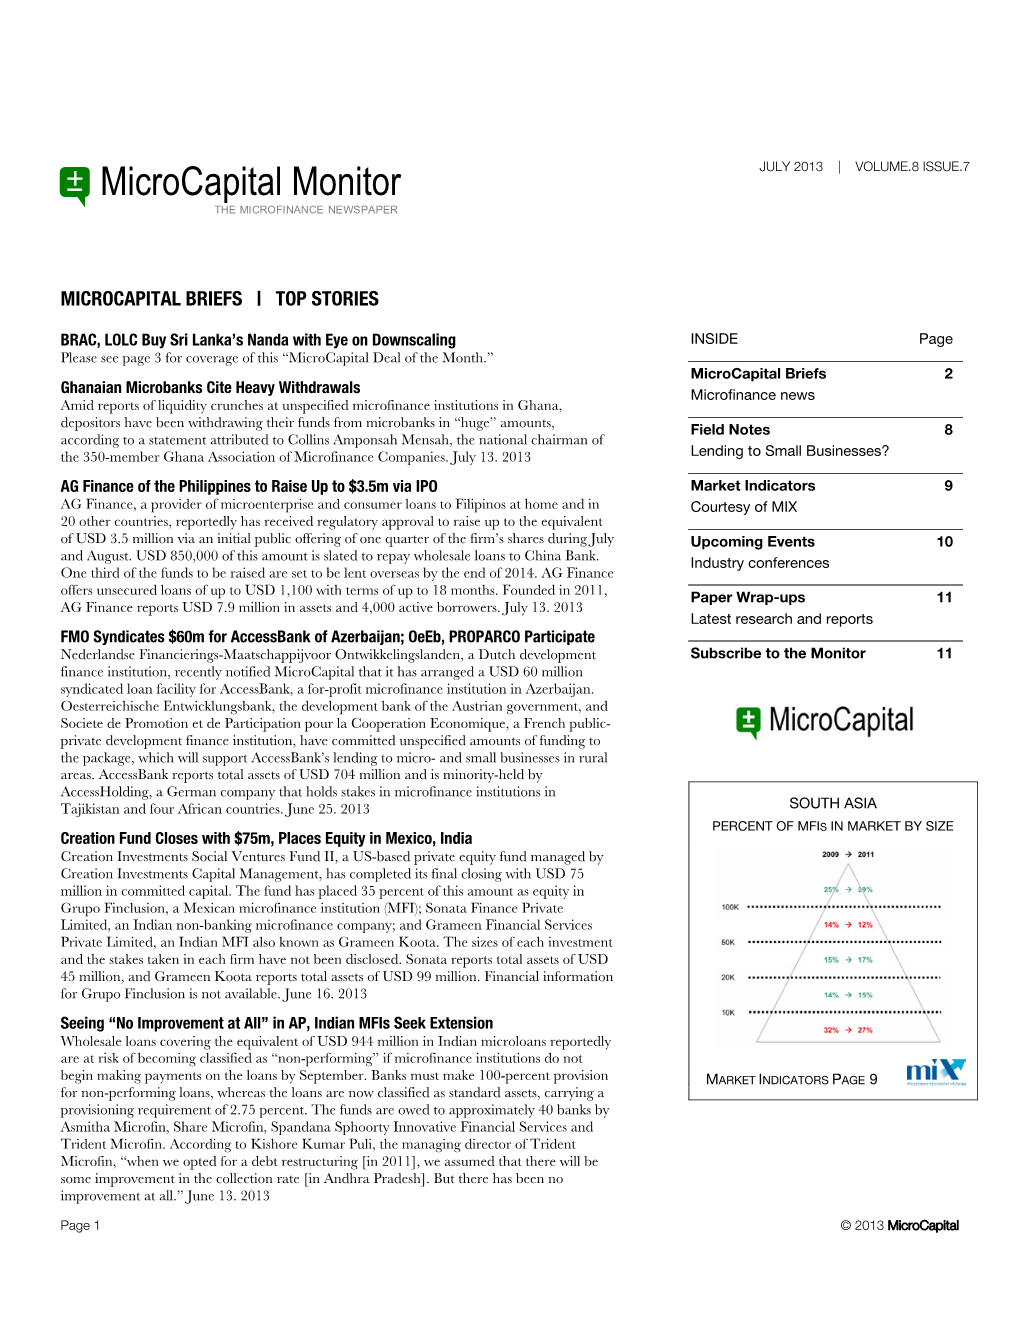 Microcapital Monitor JULY 2013 | VOLUME.8 ISSUE.7 the MICROFINANCE NEWSPAPER